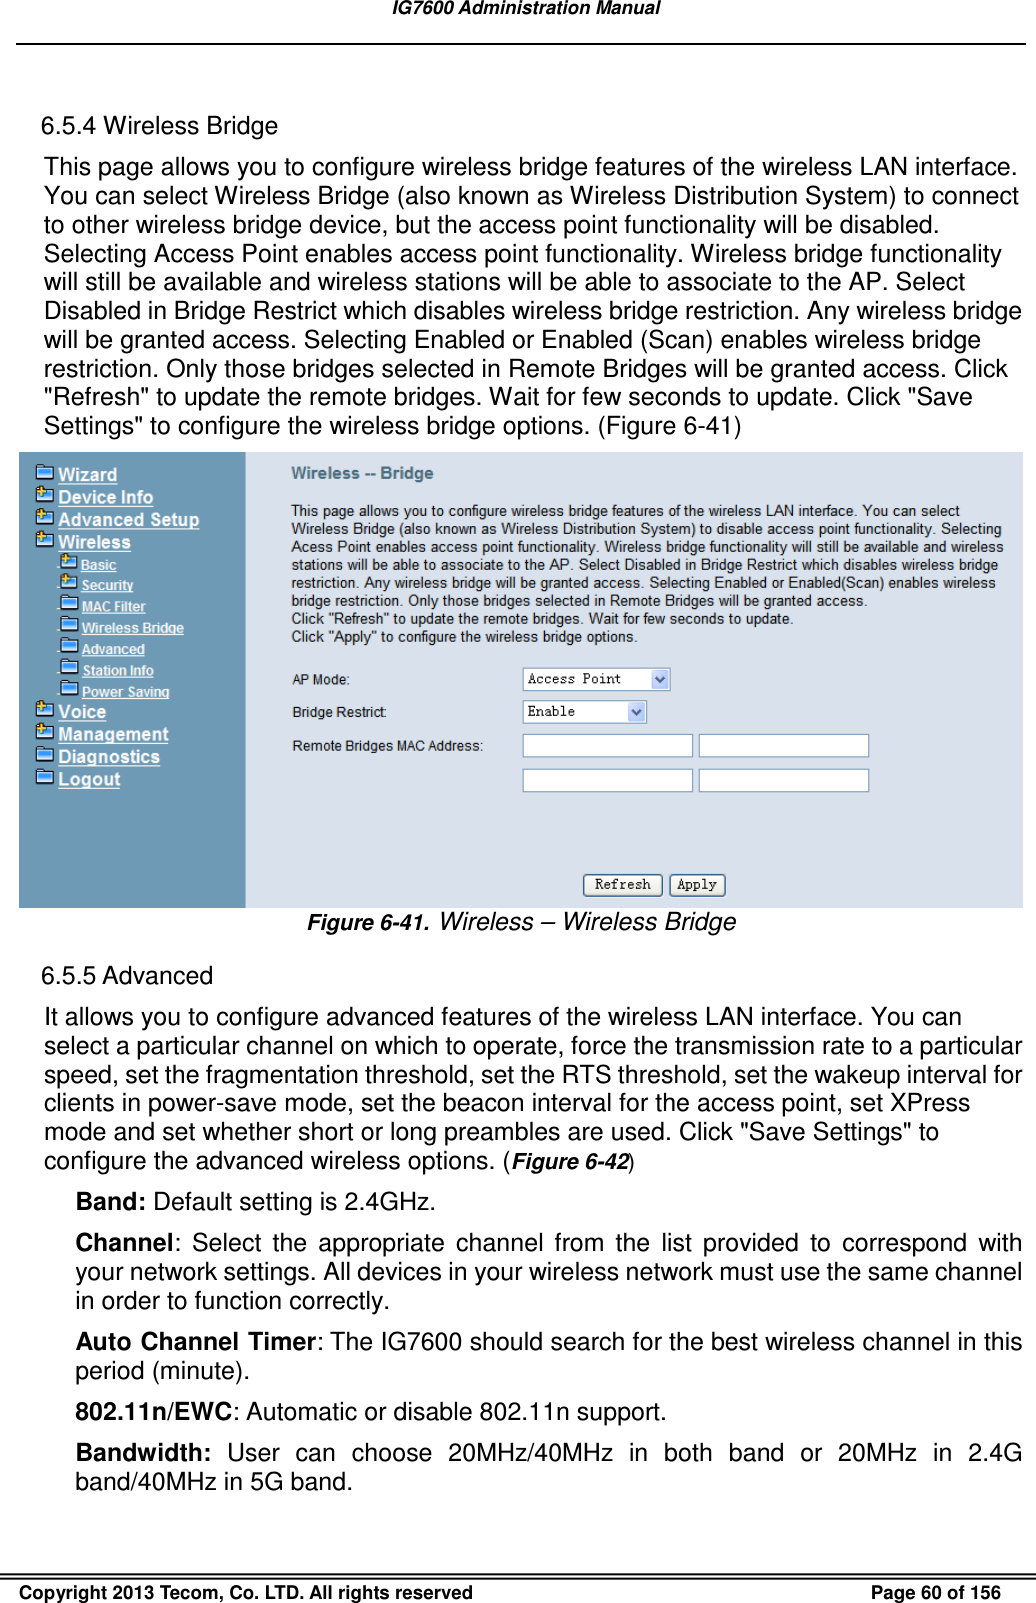   IG7600 Administration Manual  Copyright 2013 Tecom, Co. LTD. All rights reserved  Page 60 of 156  6.5.4 Wireless Bridge This page allows you to configure wireless bridge features of the wireless LAN interface. You can select Wireless Bridge (also known as Wireless Distribution System) to connect to other wireless bridge device, but the access point functionality will be disabled. Selecting Access Point enables access point functionality. Wireless bridge functionality will still be available and wireless stations will be able to associate to the AP. Select Disabled in Bridge Restrict which disables wireless bridge restriction. Any wireless bridge will be granted access. Selecting Enabled or Enabled (Scan) enables wireless bridge restriction. Only those bridges selected in Remote Bridges will be granted access. Click &quot;Refresh&quot; to update the remote bridges. Wait for few seconds to update. Click &quot;Save Settings&quot; to configure the wireless bridge options. (Figure 6-41)  Figure 6-41.  Wireless – Wireless Bridge 6.5.5 Advanced It allows you to configure advanced features of the wireless LAN interface. You can select a particular channel on which to operate, force the transmission rate to a particular speed, set the fragmentation threshold, set the RTS threshold, set the wakeup interval for clients in power-save mode, set the beacon interval for the access point, set XPress mode and set whether short or long preambles are used. Click &quot;Save Settings&quot; to configure the advanced wireless options. (Figure 6-42) Band: Default setting is 2.4GHz. Channel:  Select  the  appropriate  channel  from  the  list  provided  to  correspond  with your network settings. All devices in your wireless network must use the same channel in order to function correctly. Auto Channel Timer: The IG7600 should search for the best wireless channel in this period (minute). 802.11n/EWC: Automatic or disable 802.11n support. Bandwidth:  User  can  choose  20MHz/40MHz  in  both  band  or  20MHz  in  2.4G band/40MHz in 5G band. 